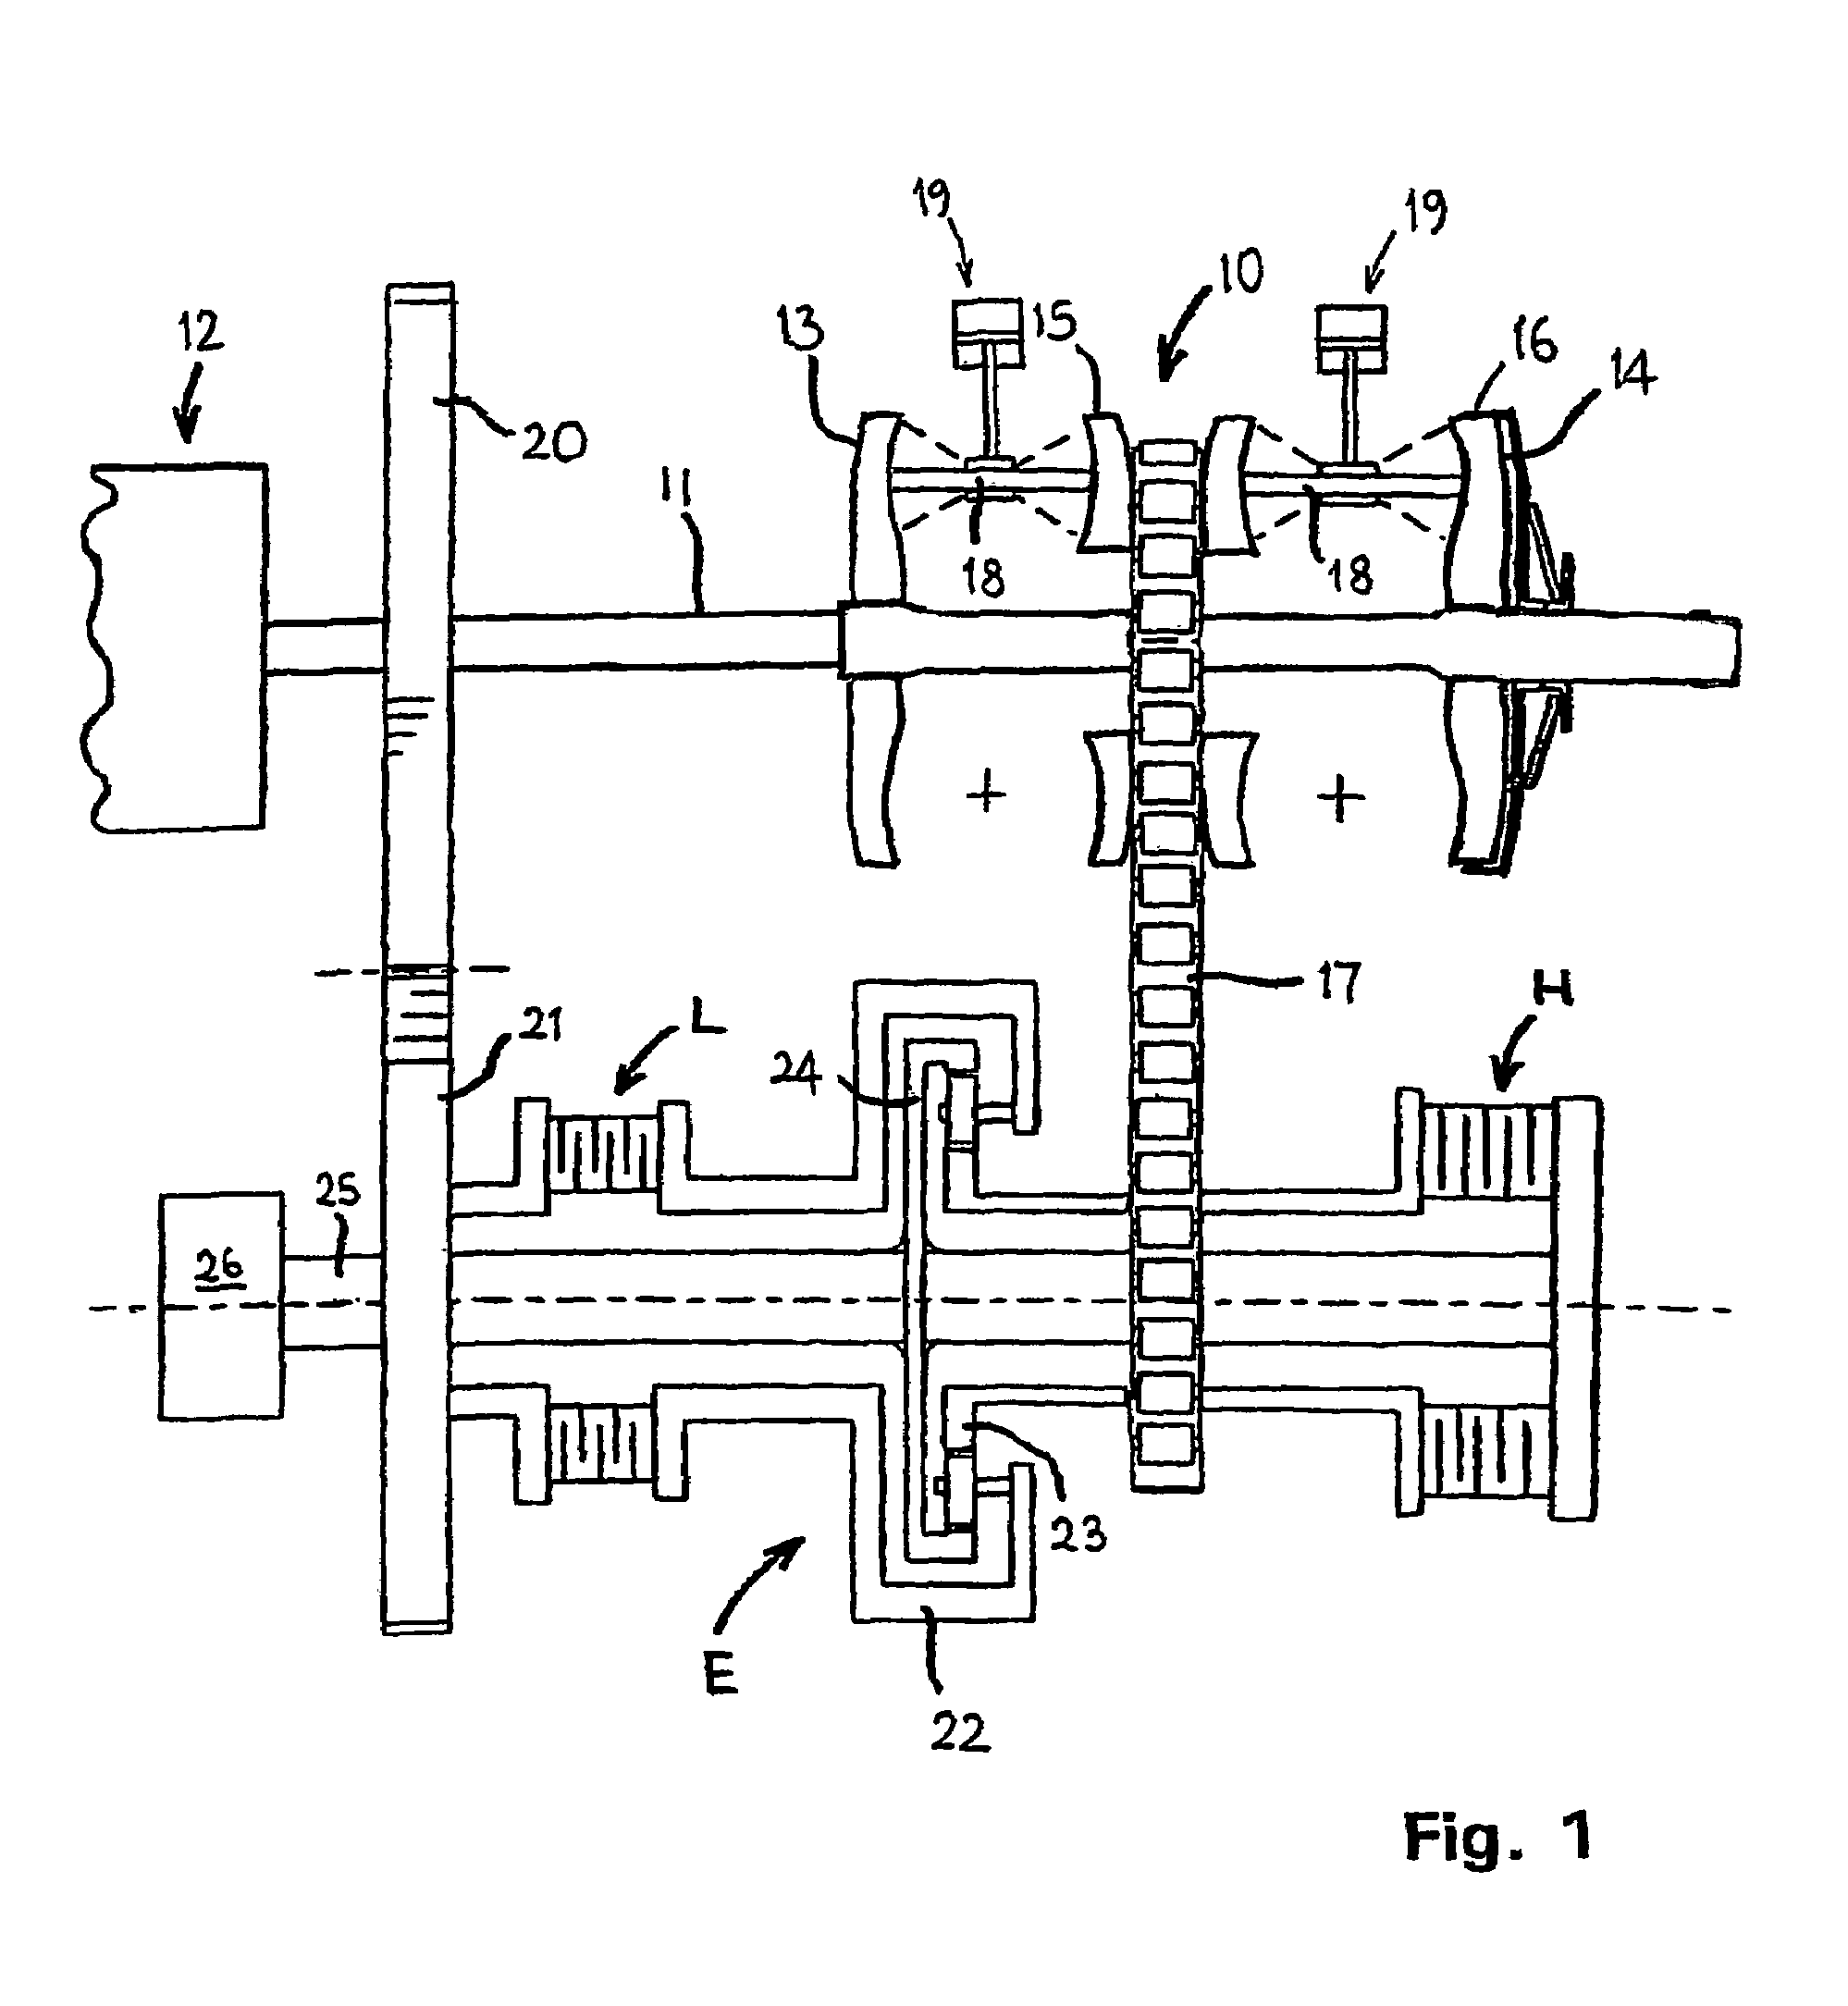 Control system and method for a continuously variable transmission